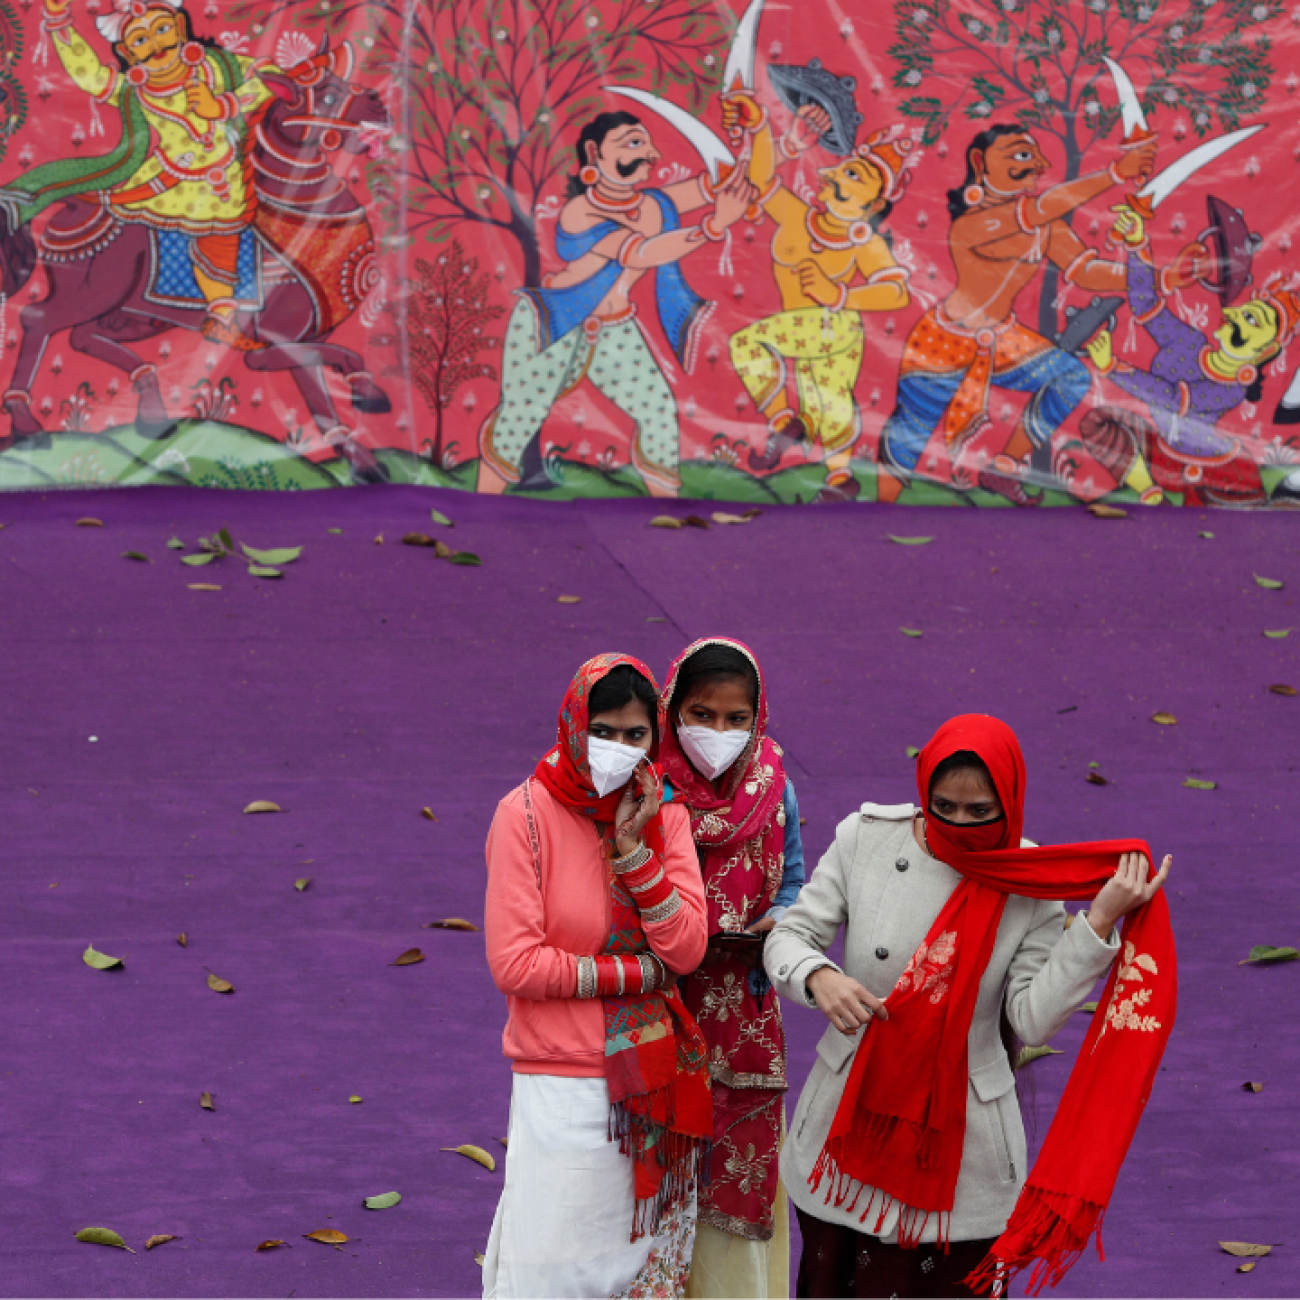 Women wearing protective face masks and colorful red and white saris stand in front of a purple wall and a color mural as they watch a dress rehearsal for the Republic Day parade, in New Delhi, India, on January 23, 2022. REUTERS/Adnan Abidi